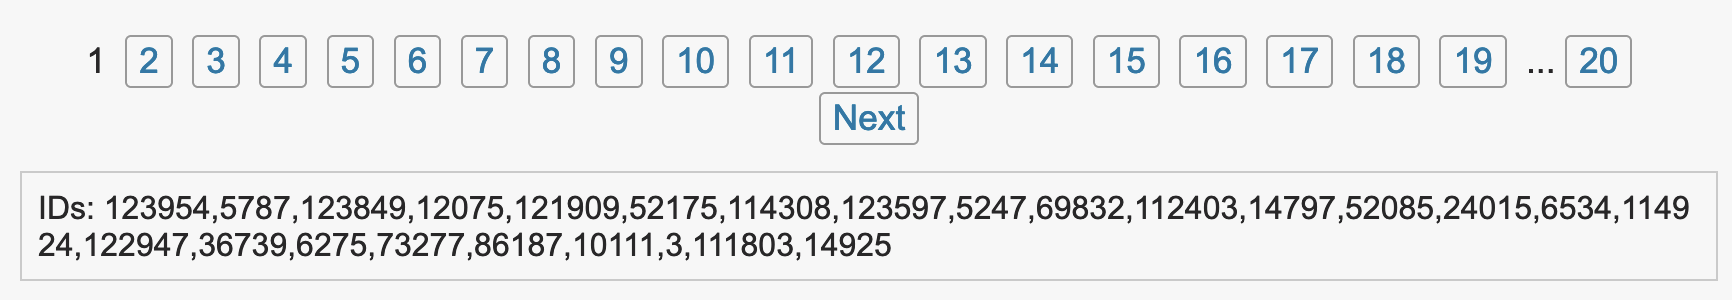 Screenshot showing a list of comma-delimited ID numbers directly below the pagination links for the results